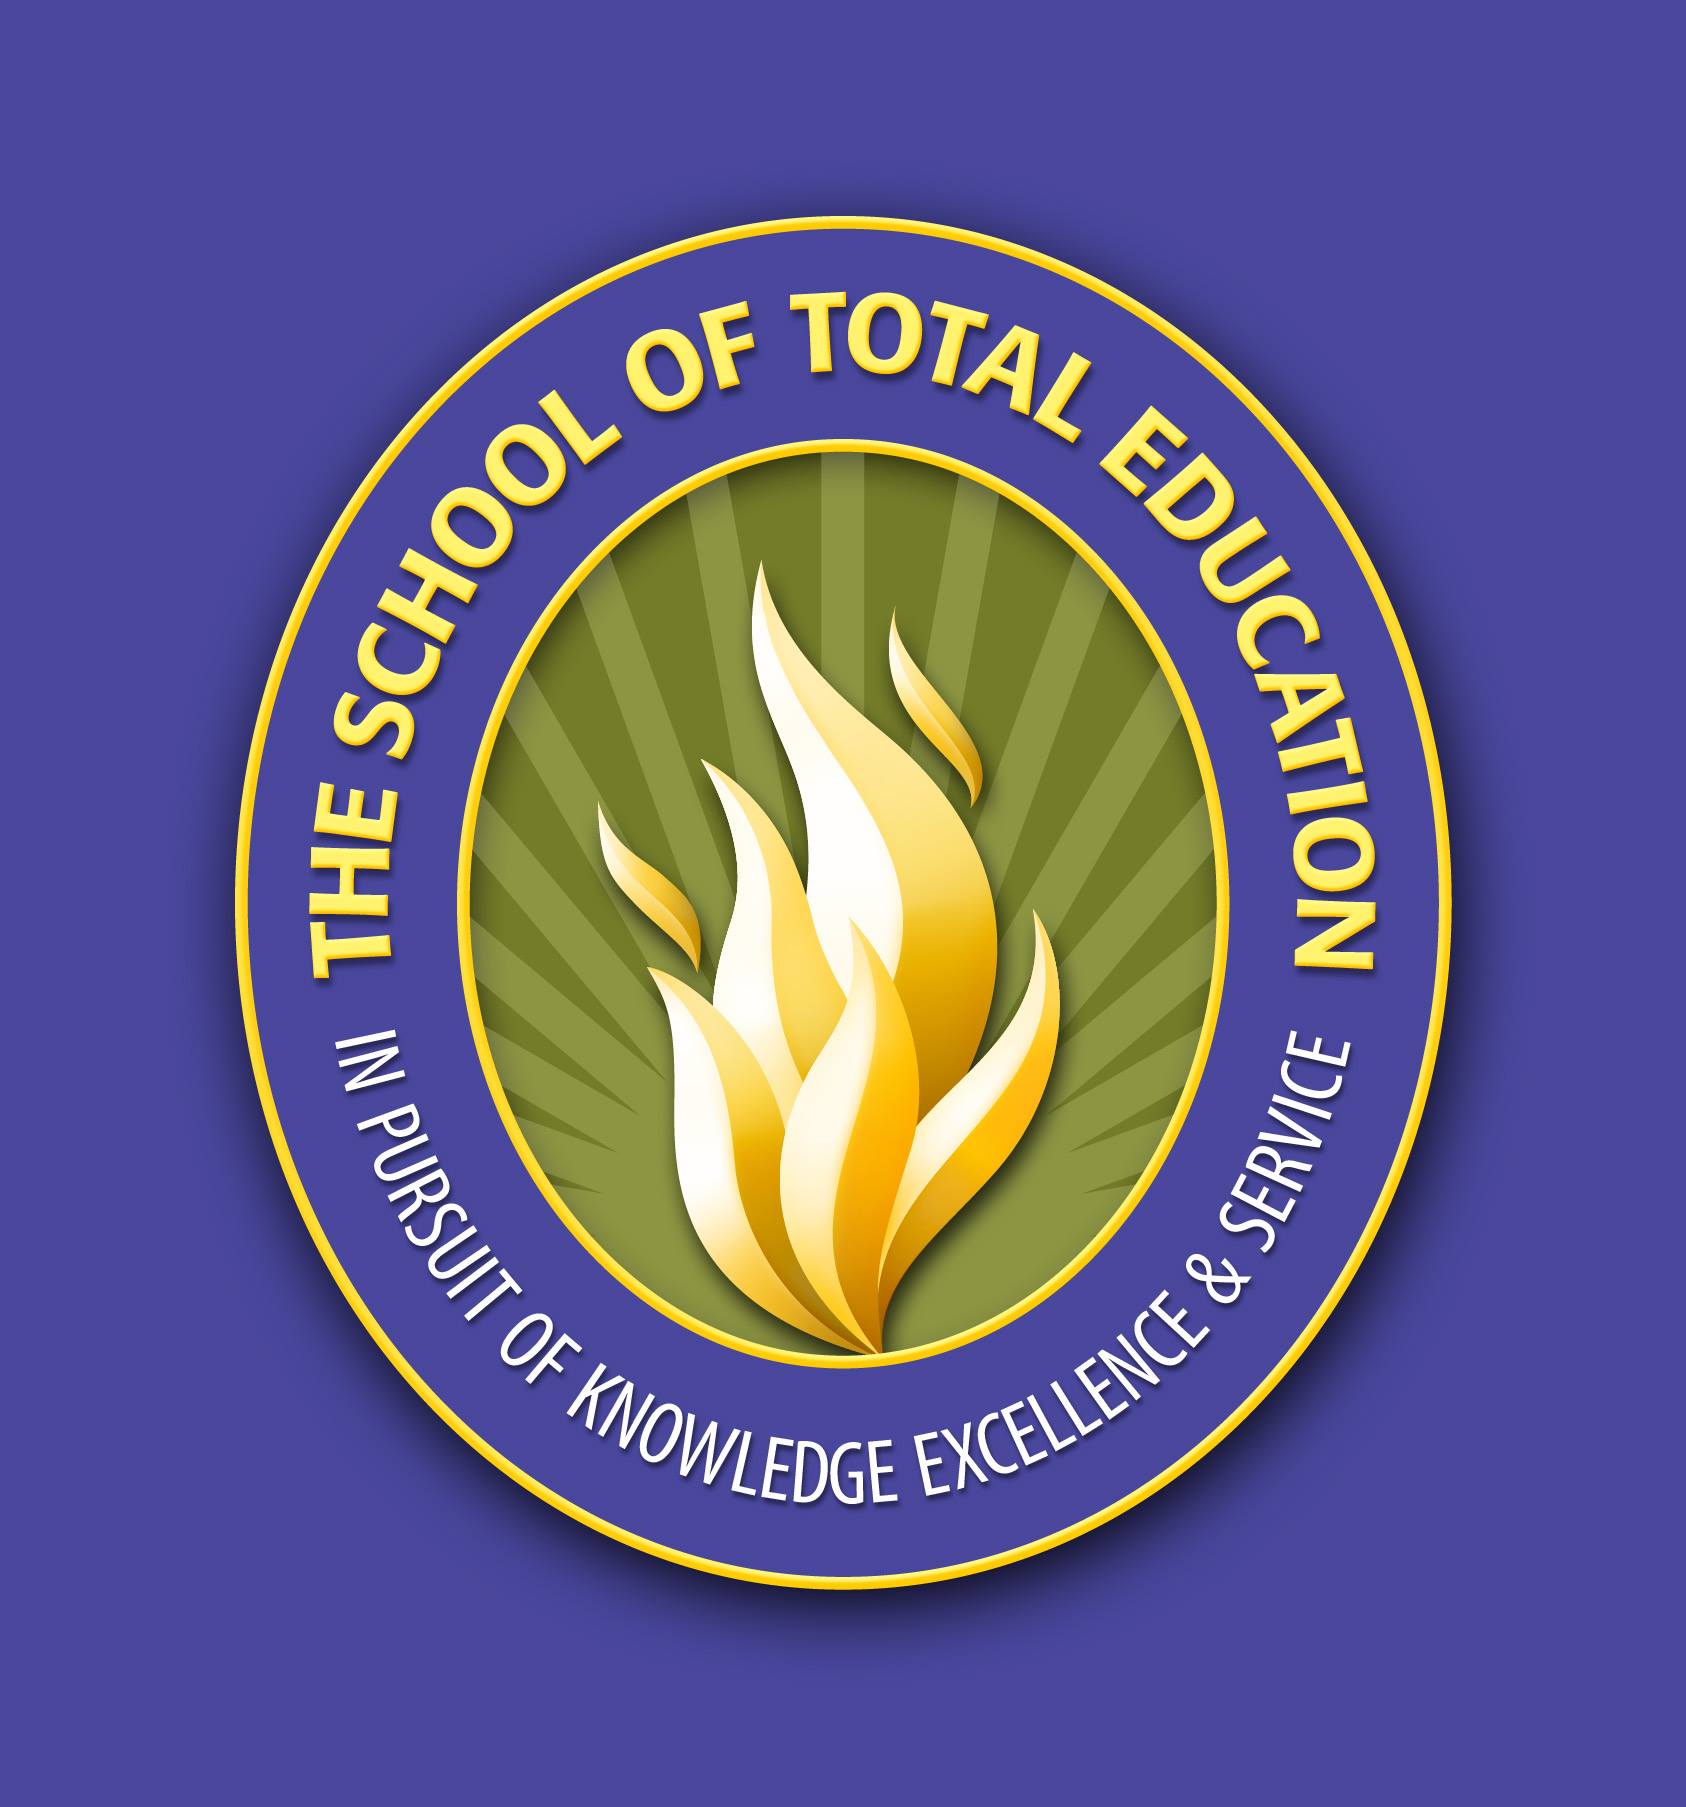 The School of Total Education校徽